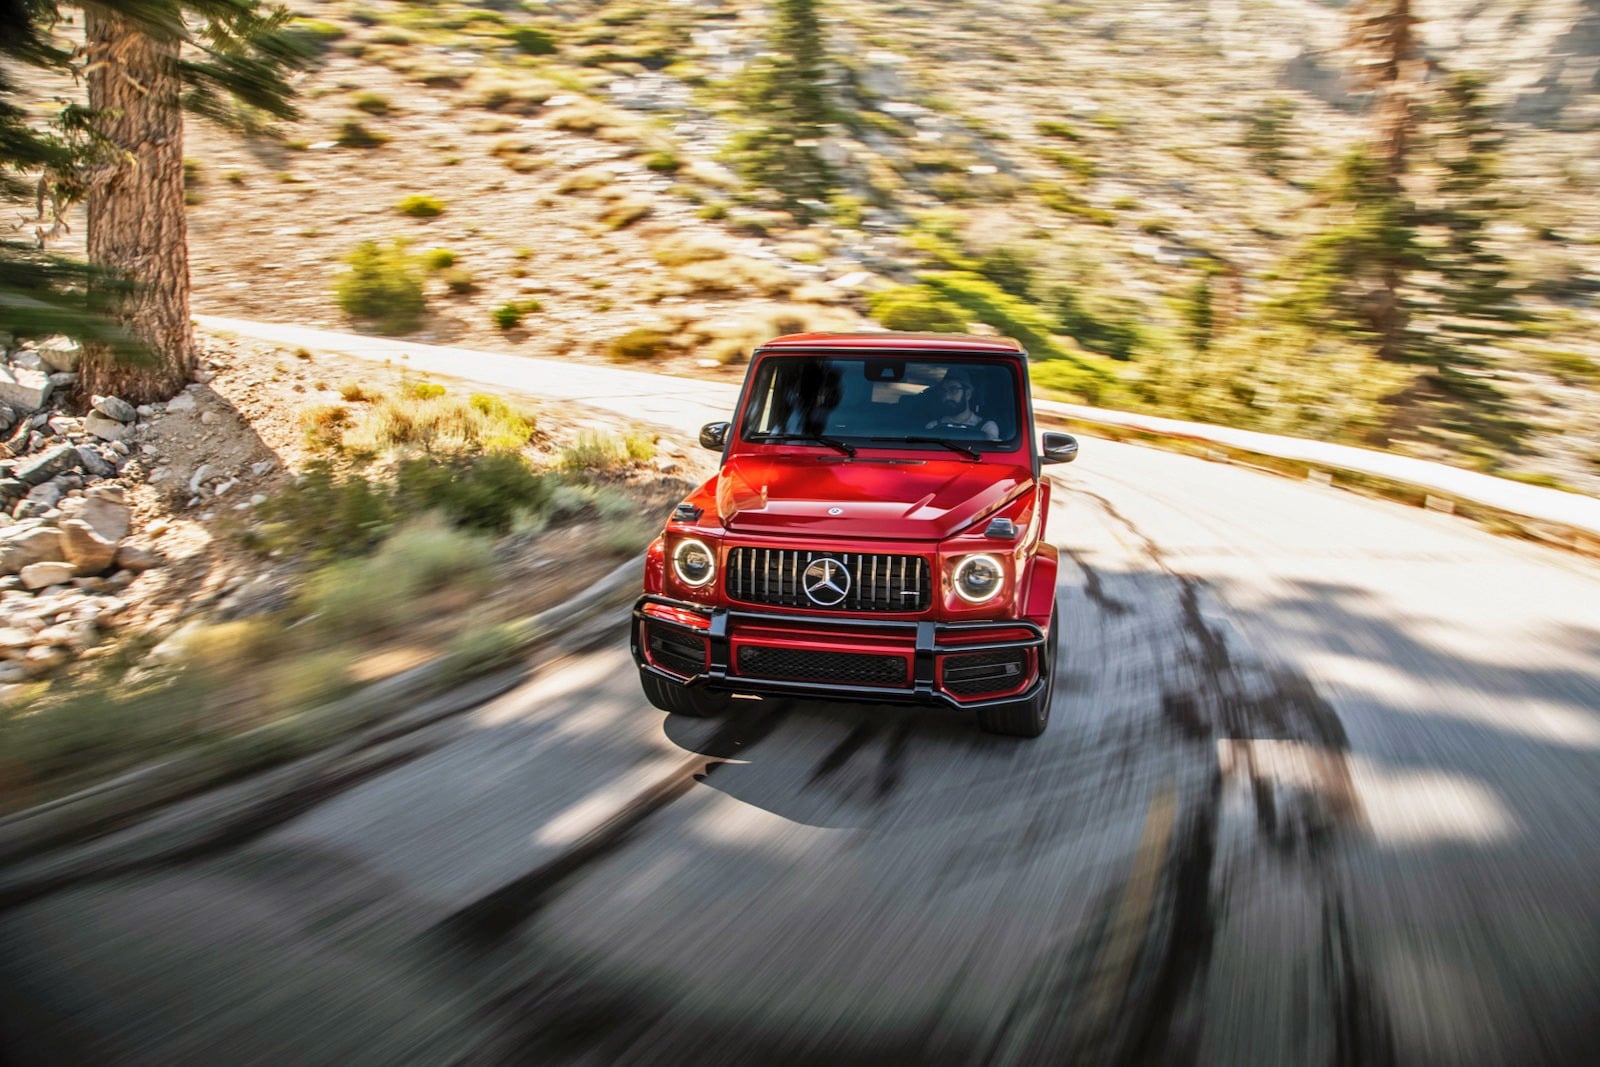 TRACK TESTED: The 2021 Mercedes-AMG G 63 Is a Silly, Smile-Inducing SUV